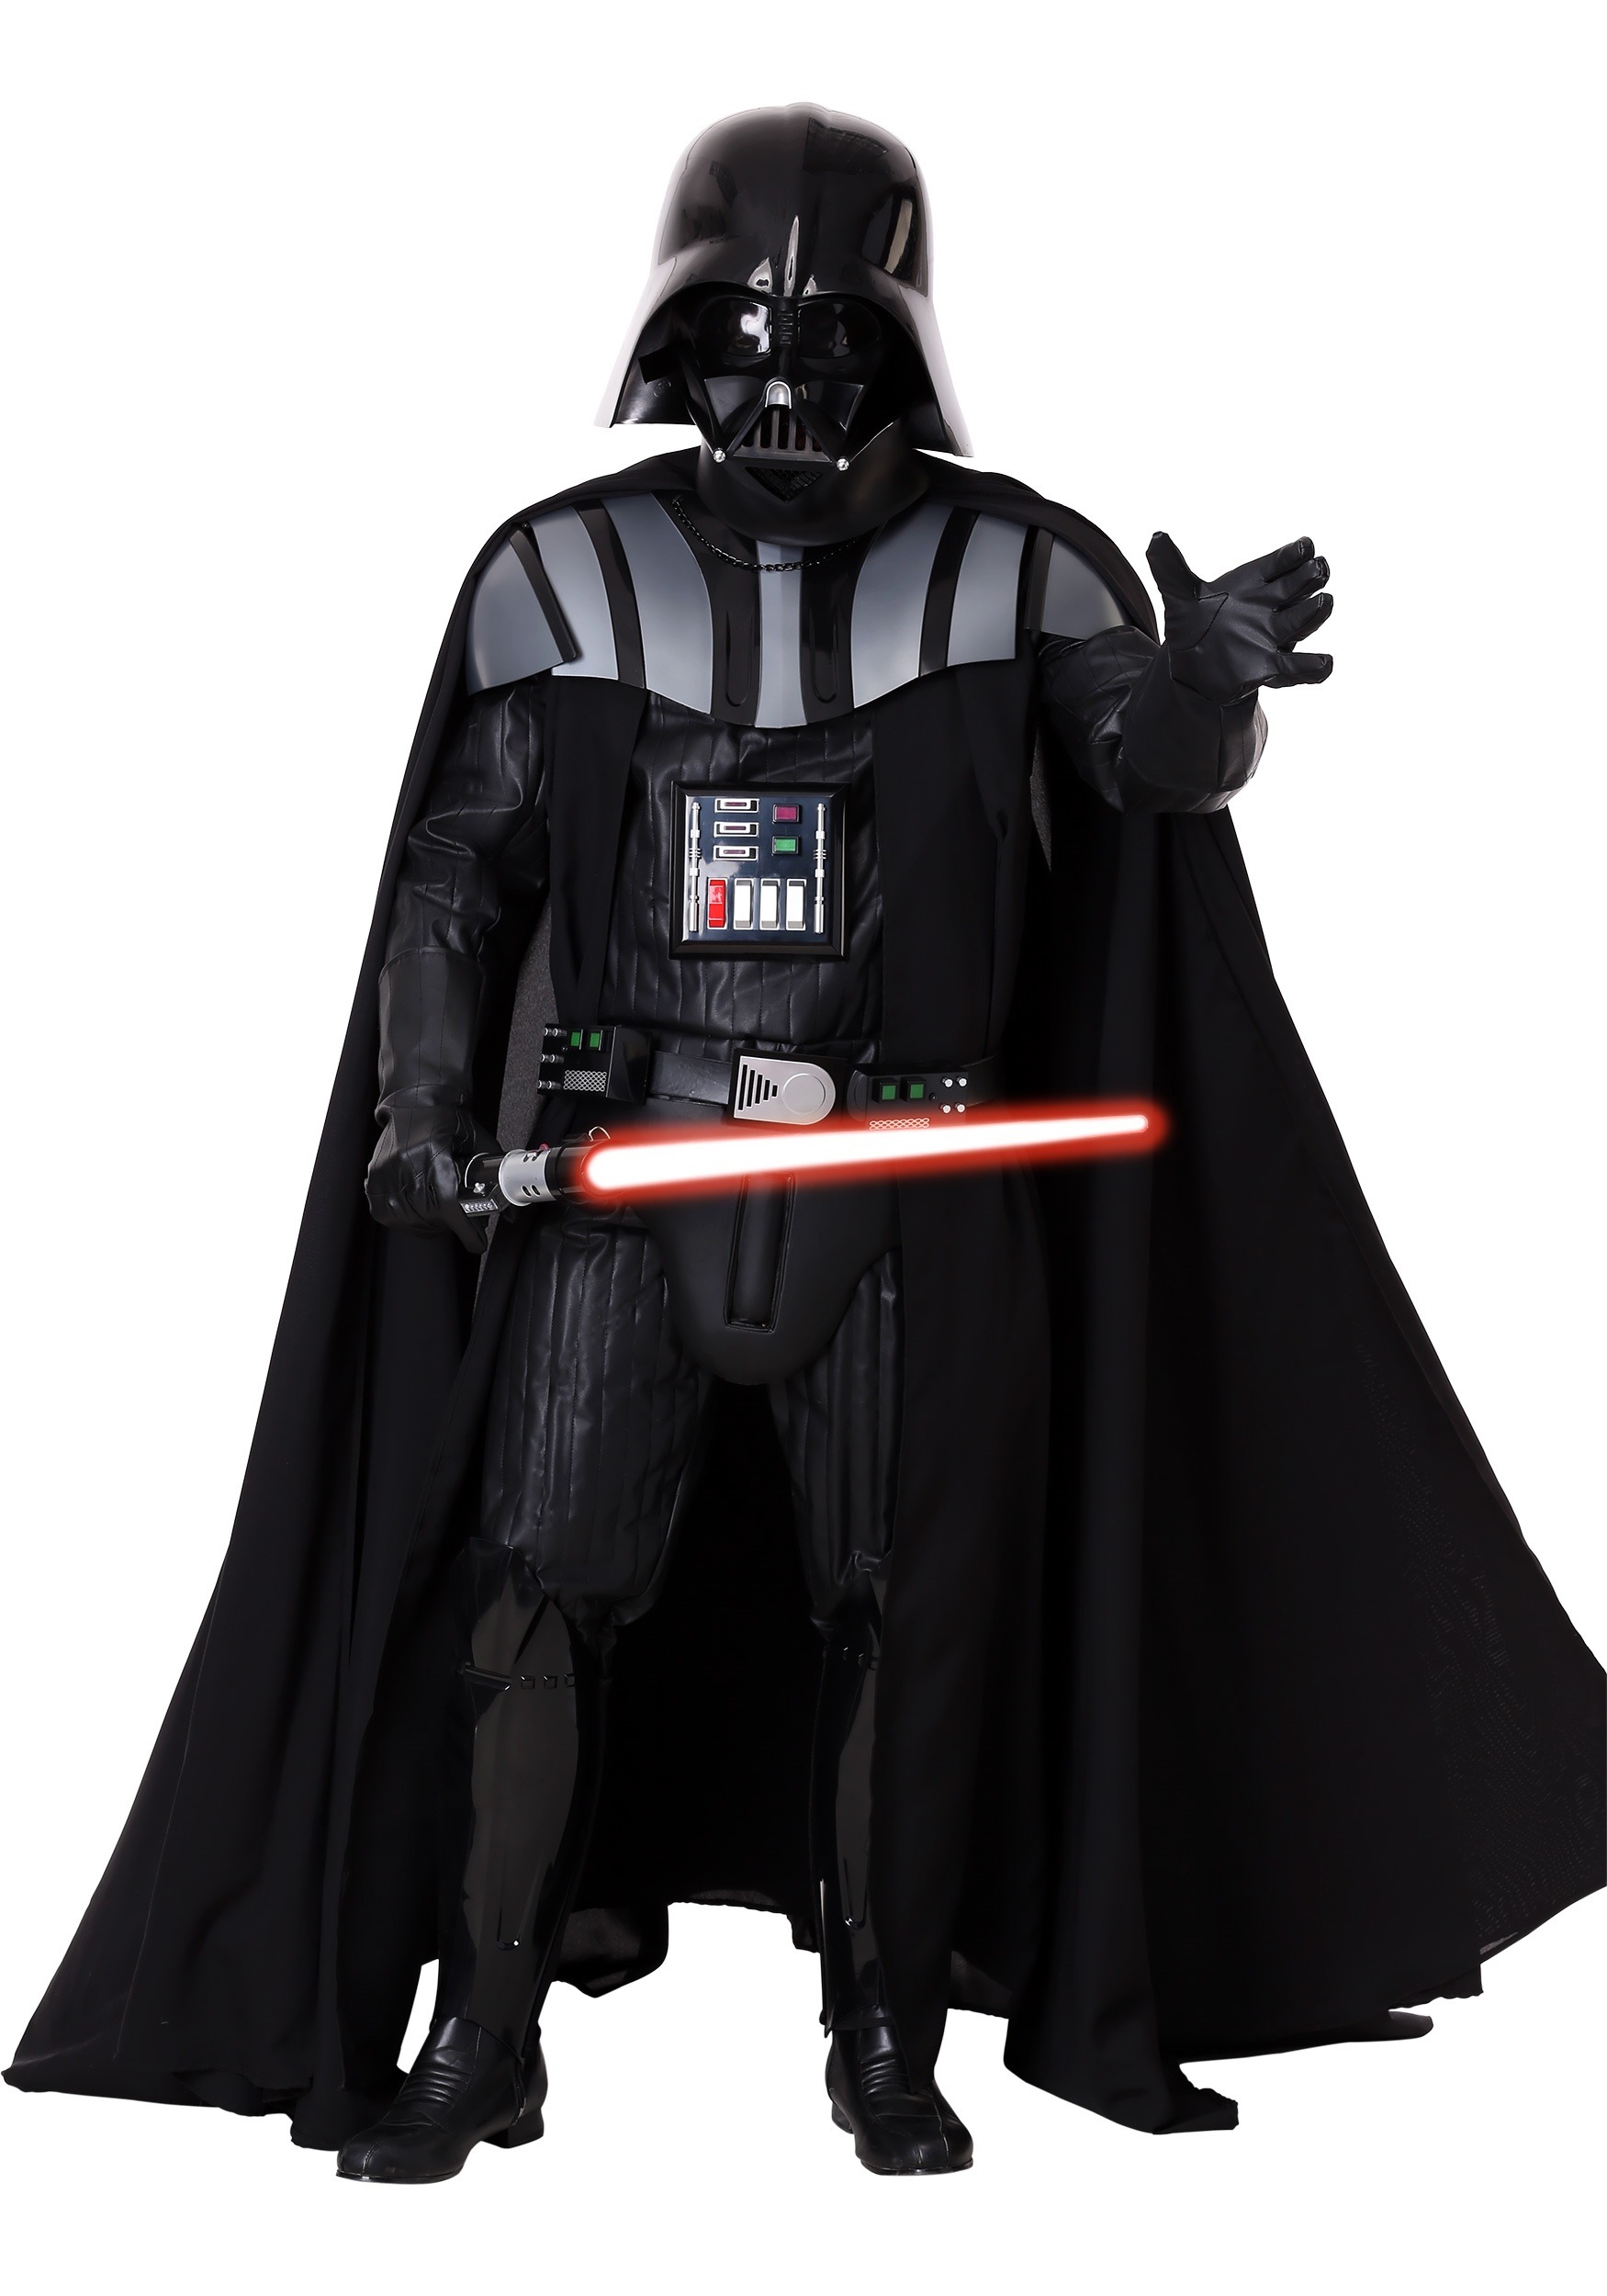 expositie Spelling Raad Authentic Darth Vader - Costume Real Replica - Offical Star Wars Costume